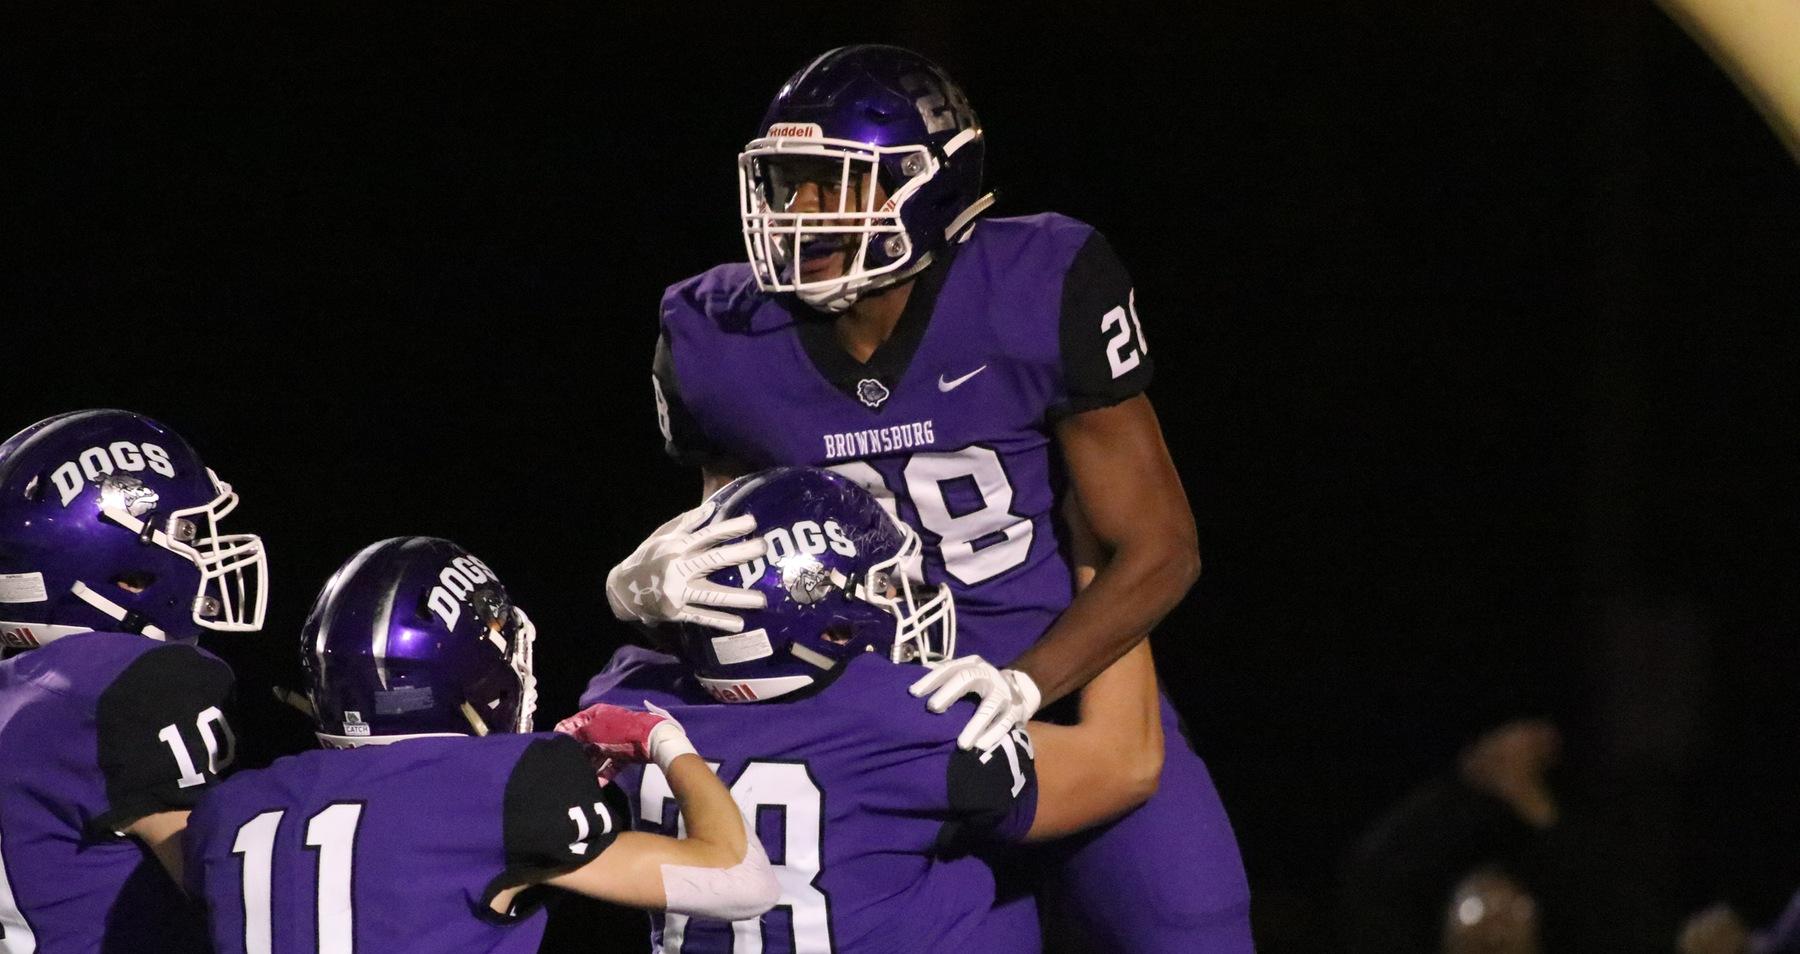 No. 8 @BHSdogsfootball to play No. 1 Avon in Sectional Semi-Final